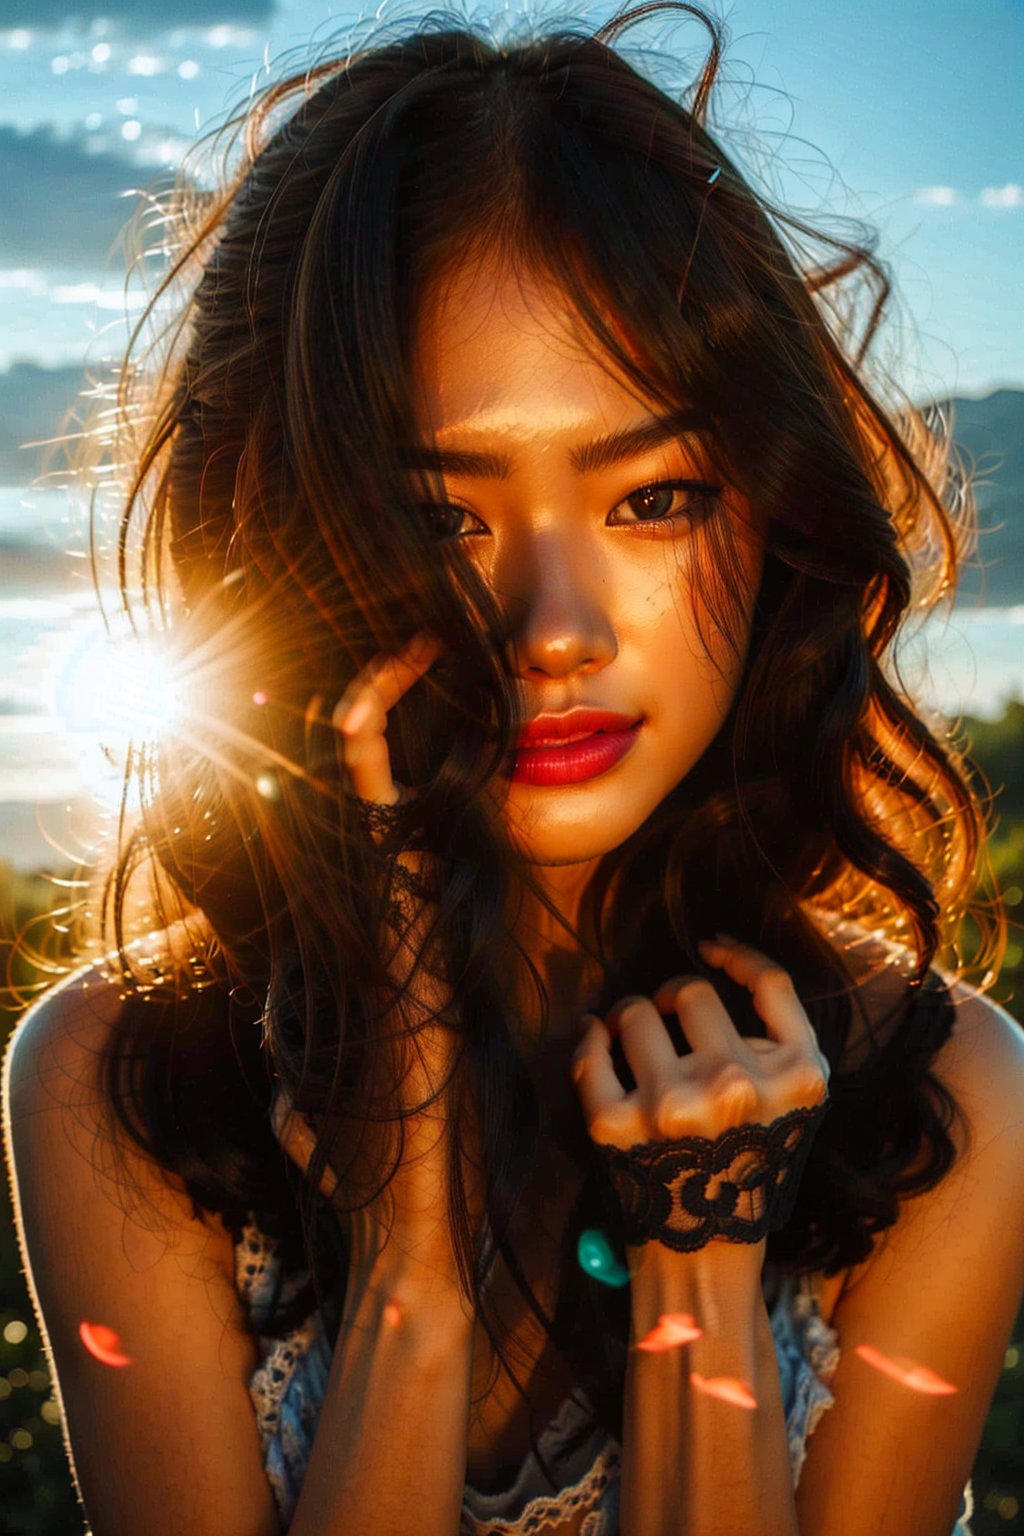 (((masterpiece))), realistic, 3d render, medium dark colors, soft tones, lighting details,generates an image of a 20-year-old a single chinese girl, red lips, she leans forward and happy smile
Sunset , backlight, highlights of wavy hair, len flares , 
Sunbeams, magic hour sky
Nice fingers , one hand over head